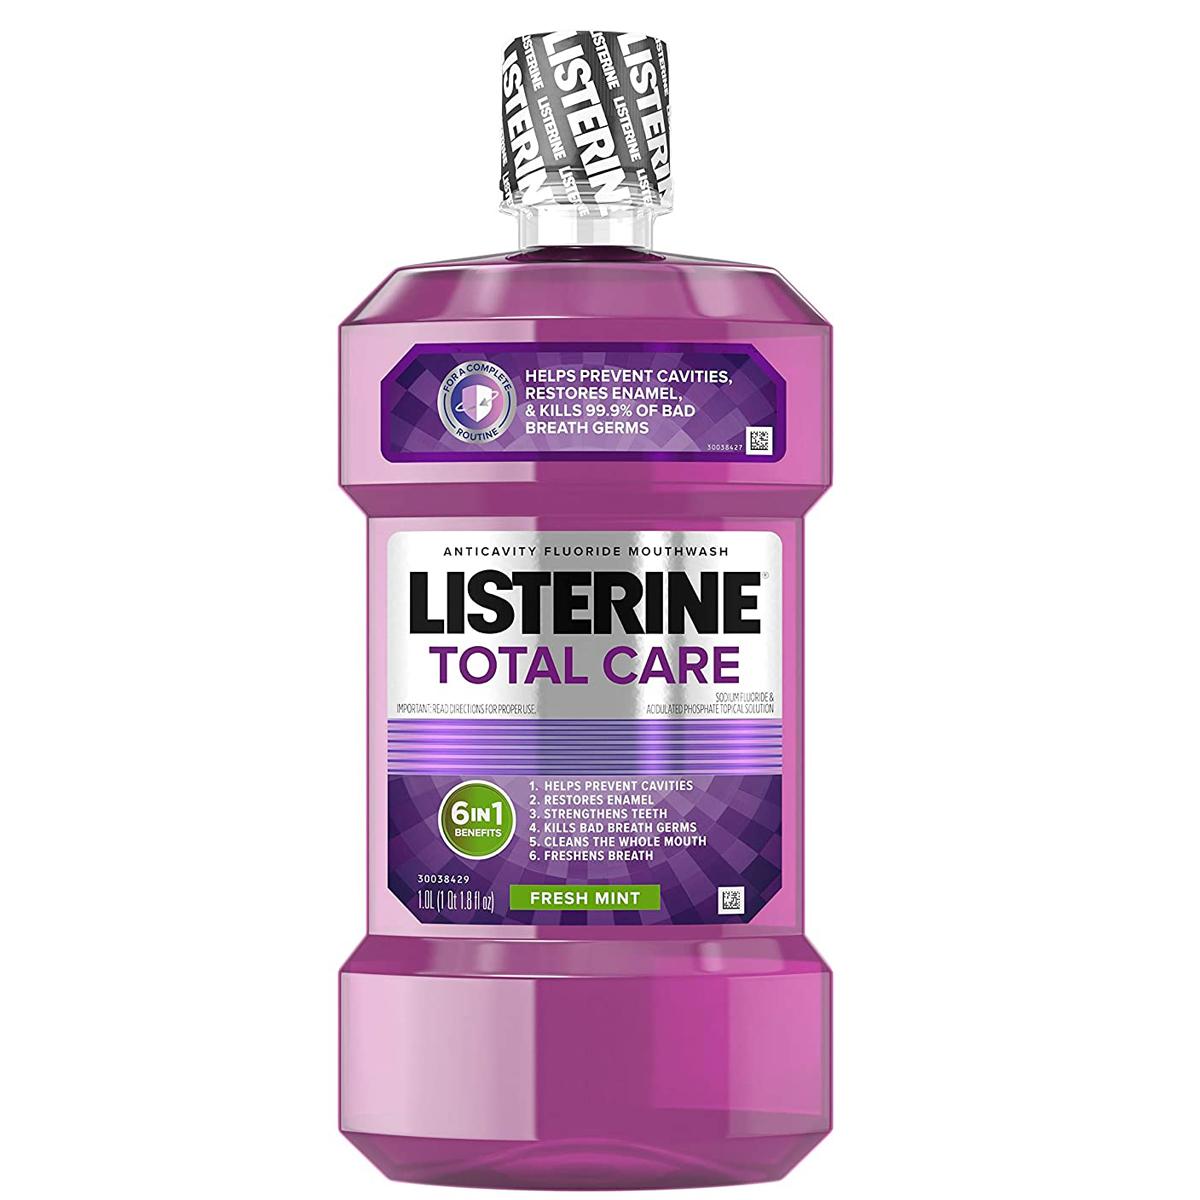 Listerine Total Care Anticavity Fluoride Mouthwash for $4.63 Shipped